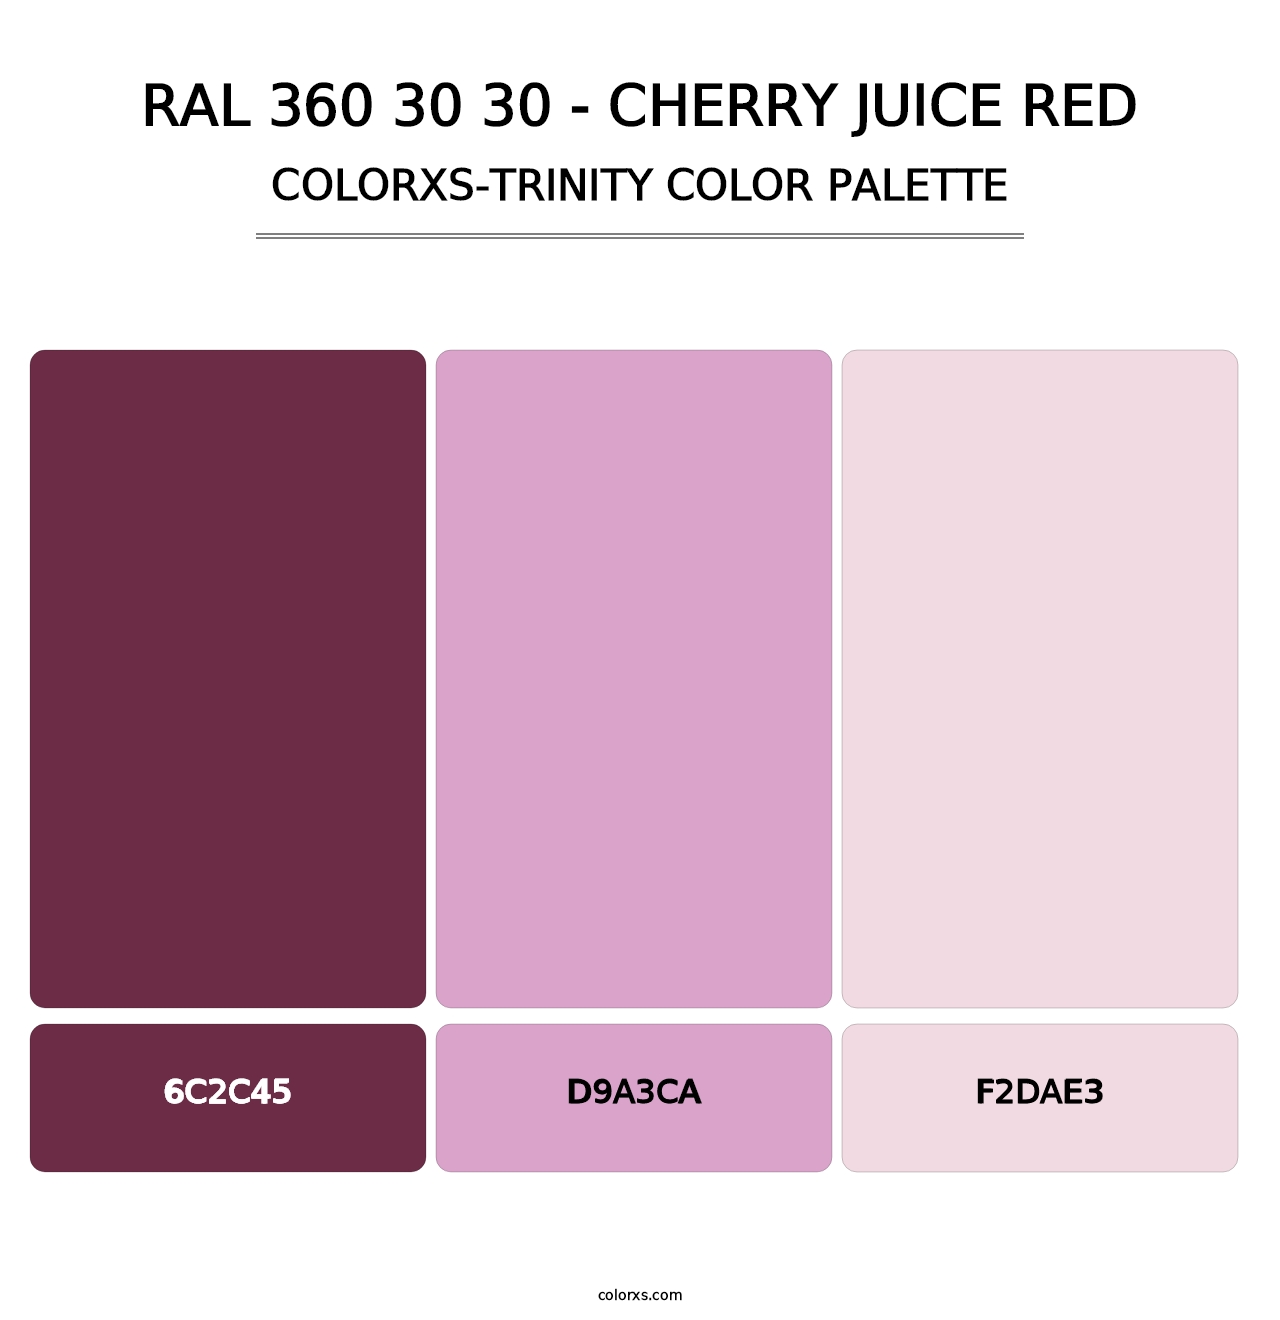 RAL 360 30 30 - Cherry Juice Red - Colorxs Trinity Palette